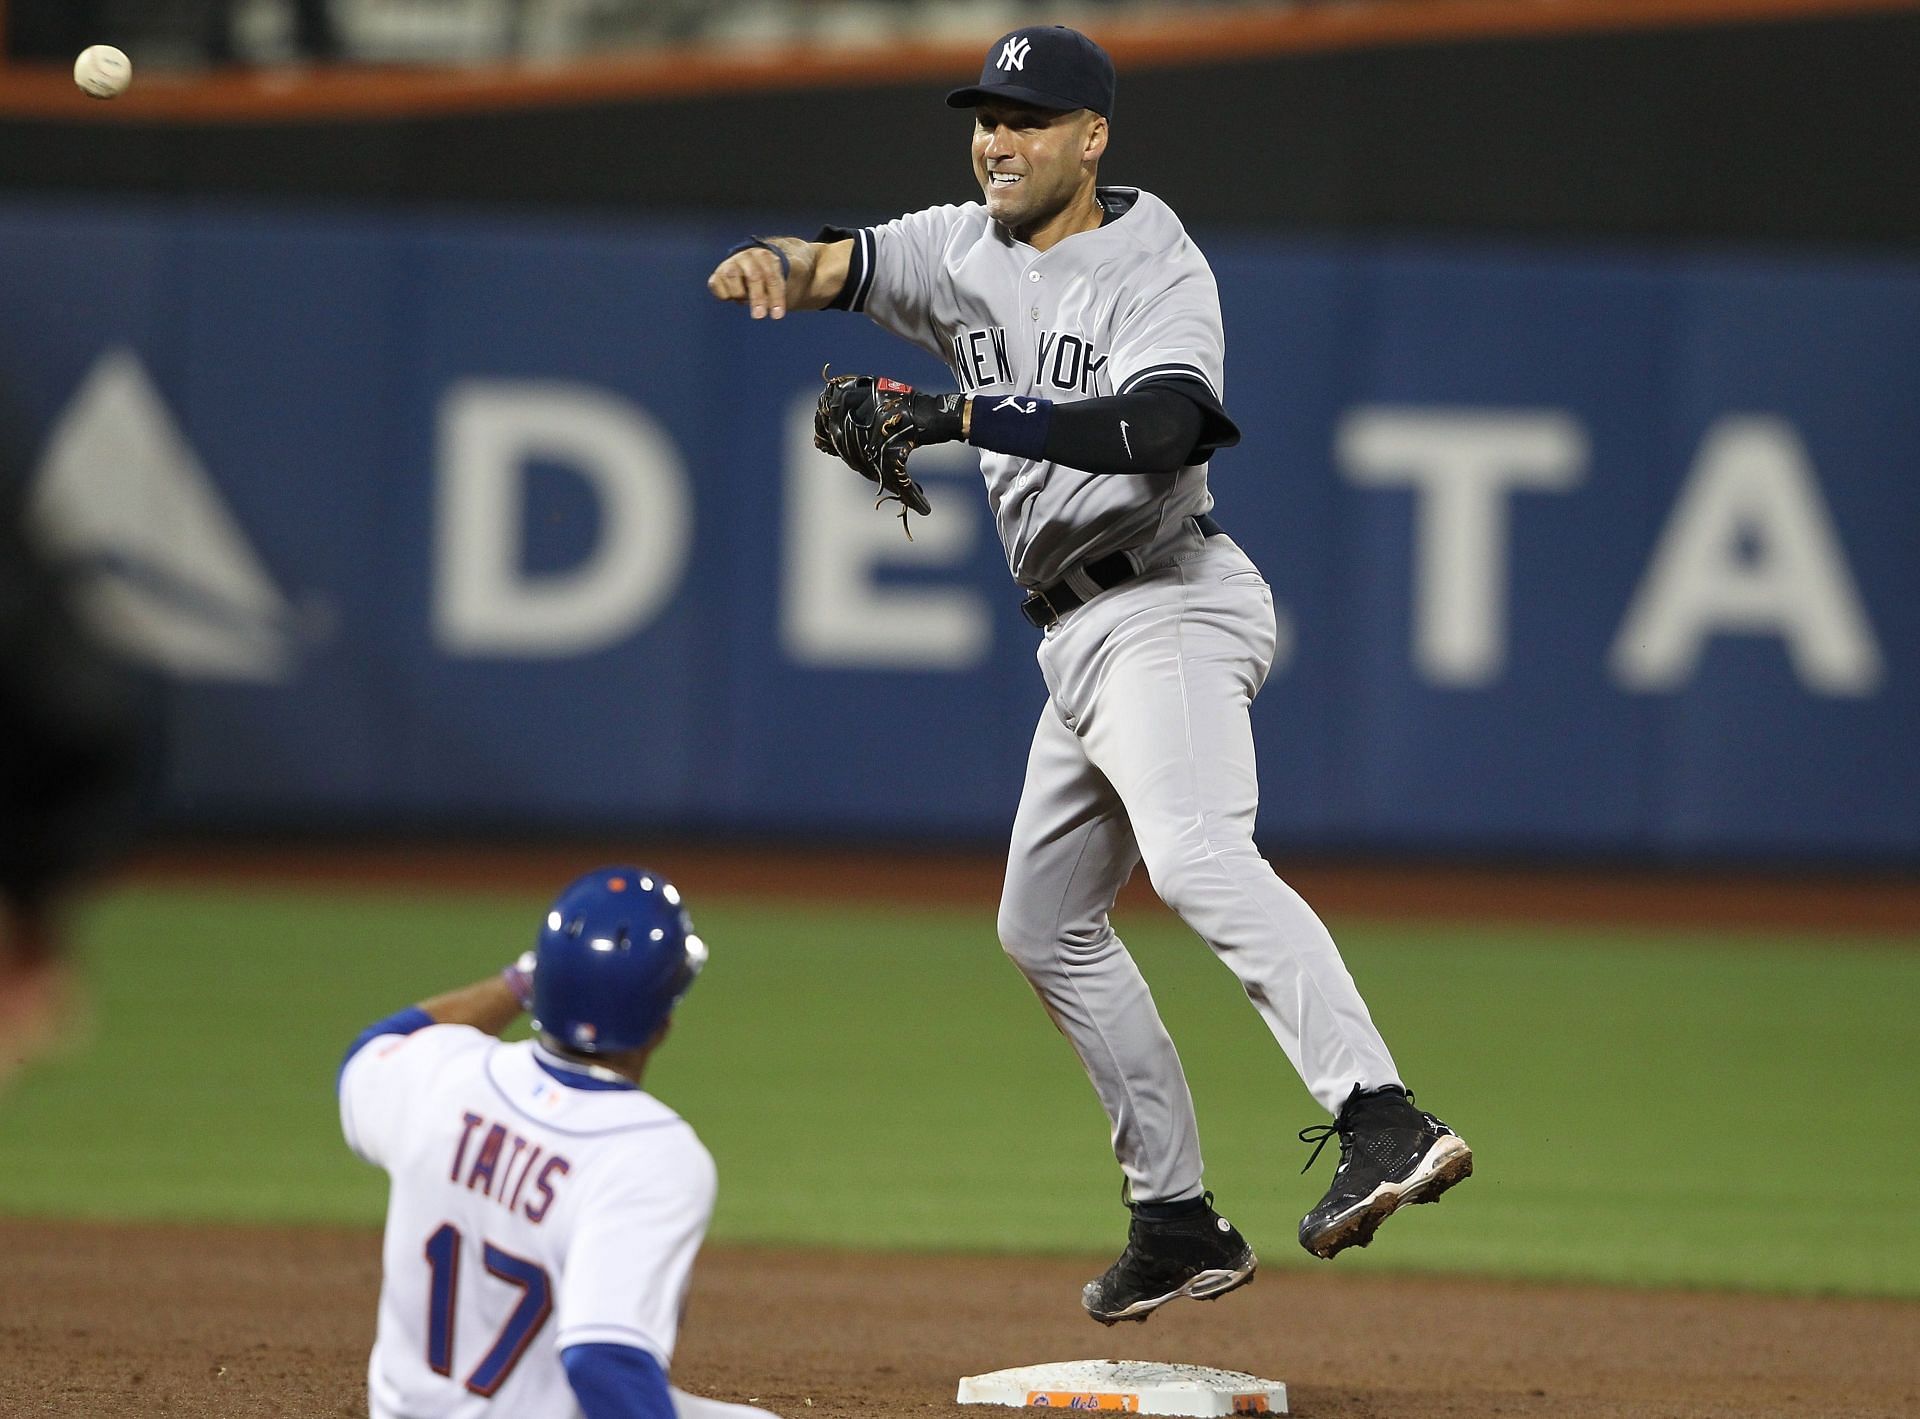 Derek Jeter in the field against the New York Mets at Citi Field in New York